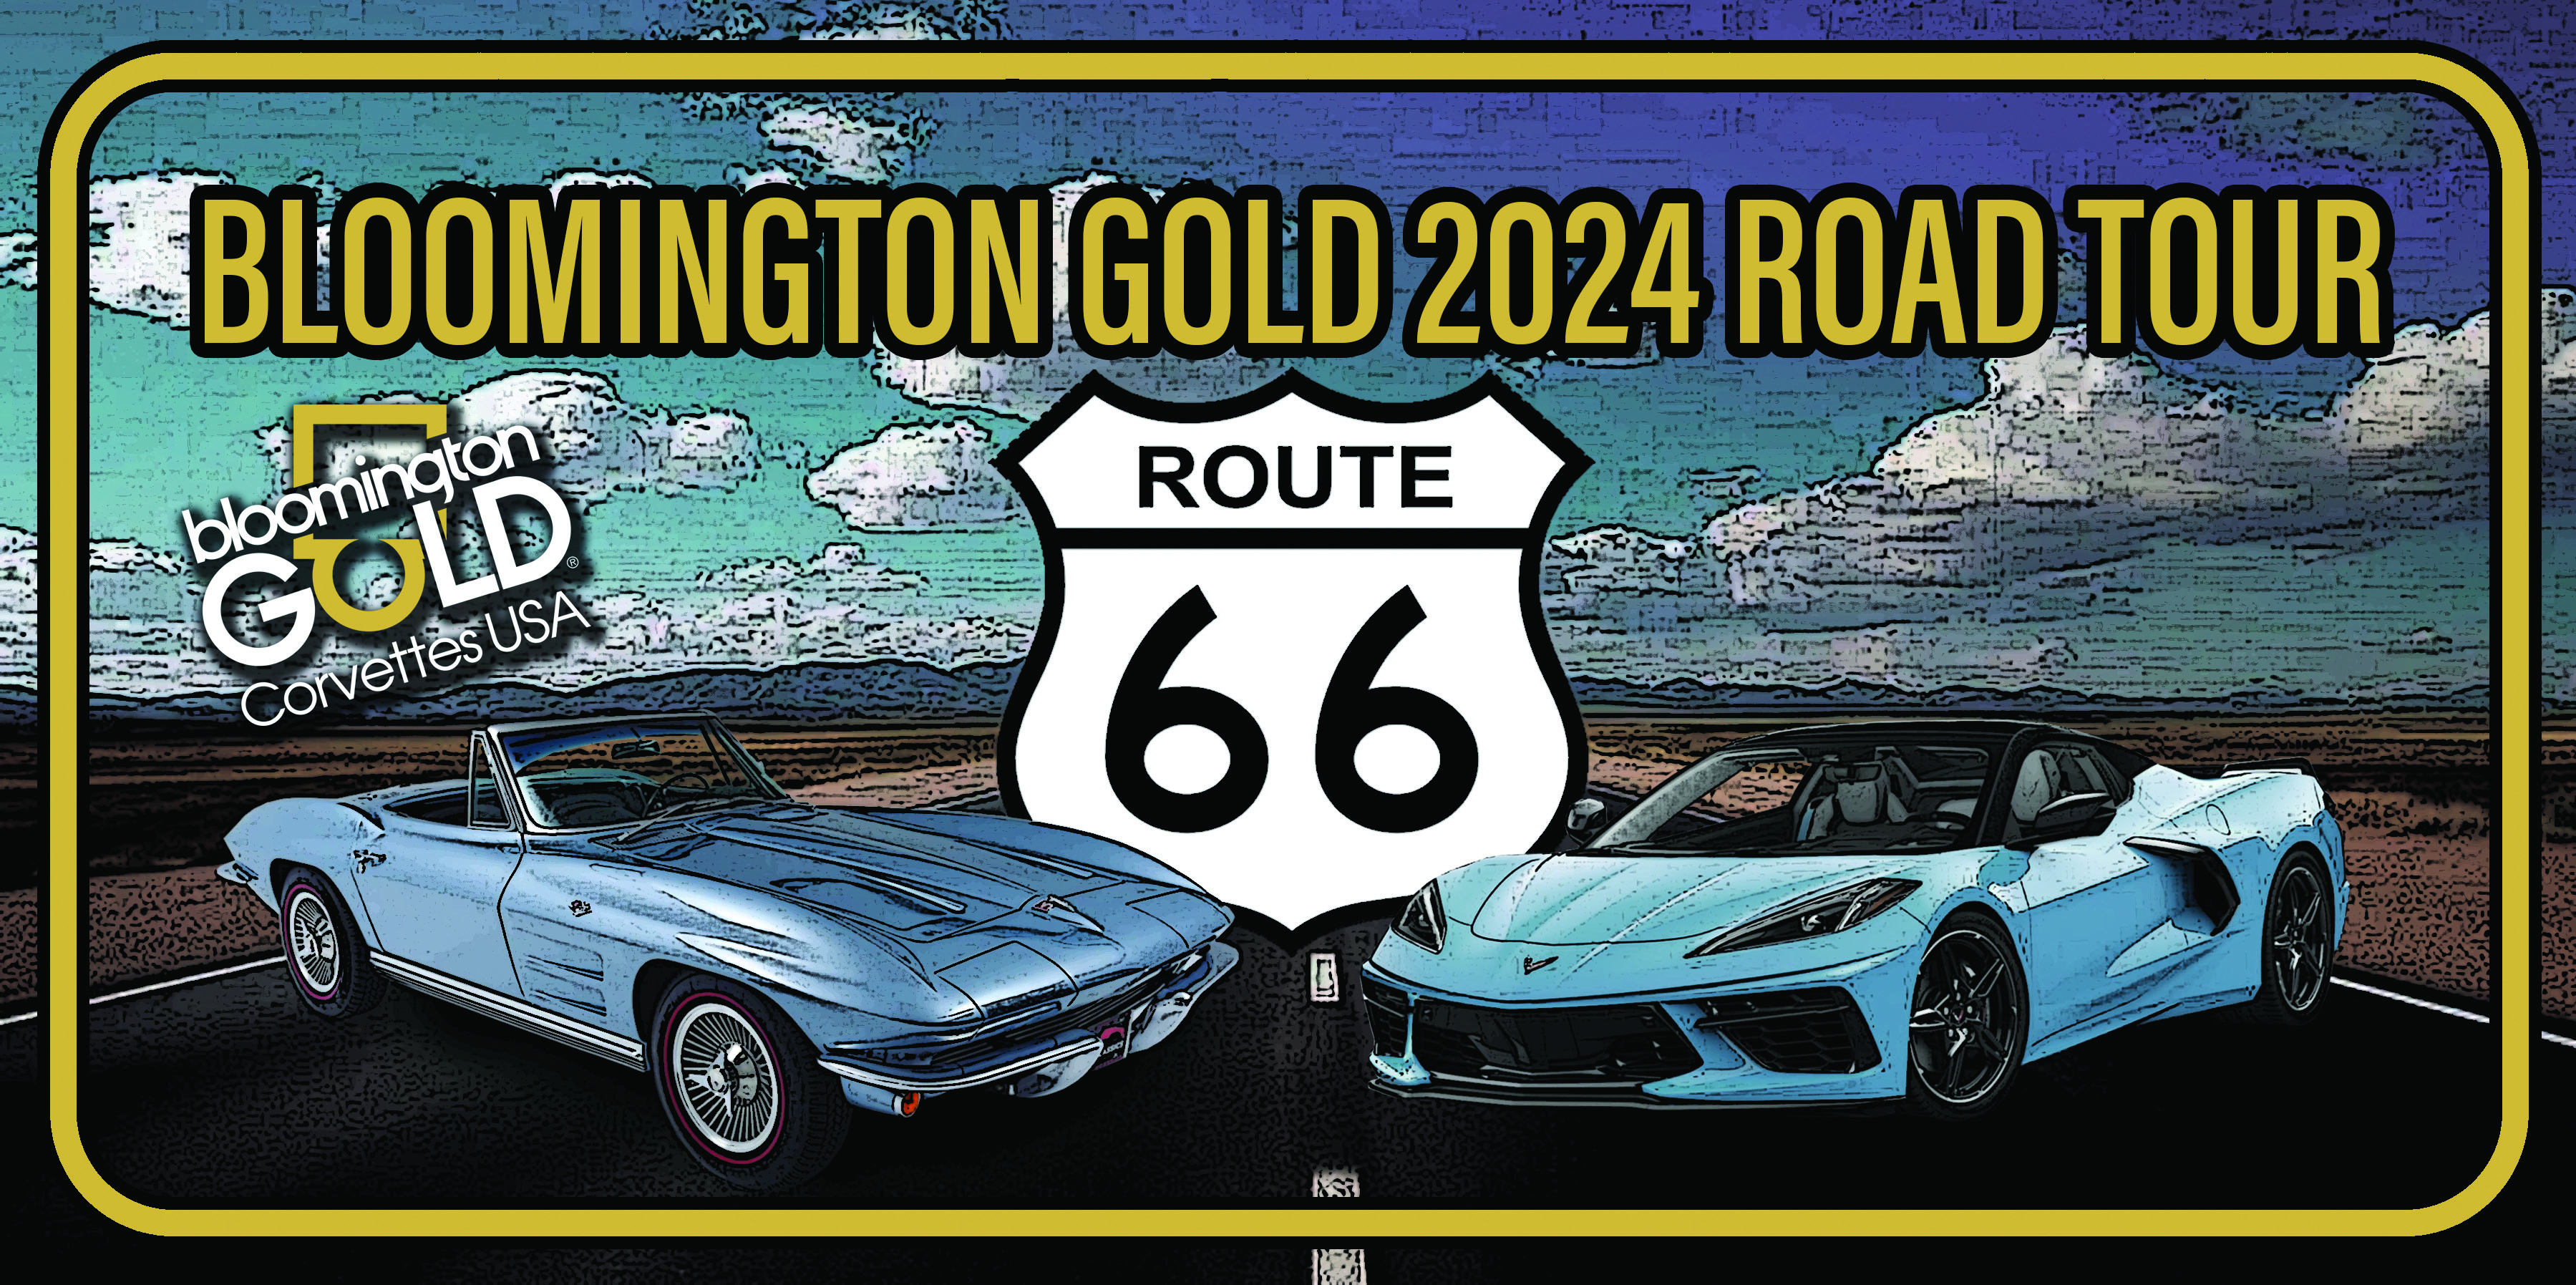 2024 Road Tour Plate